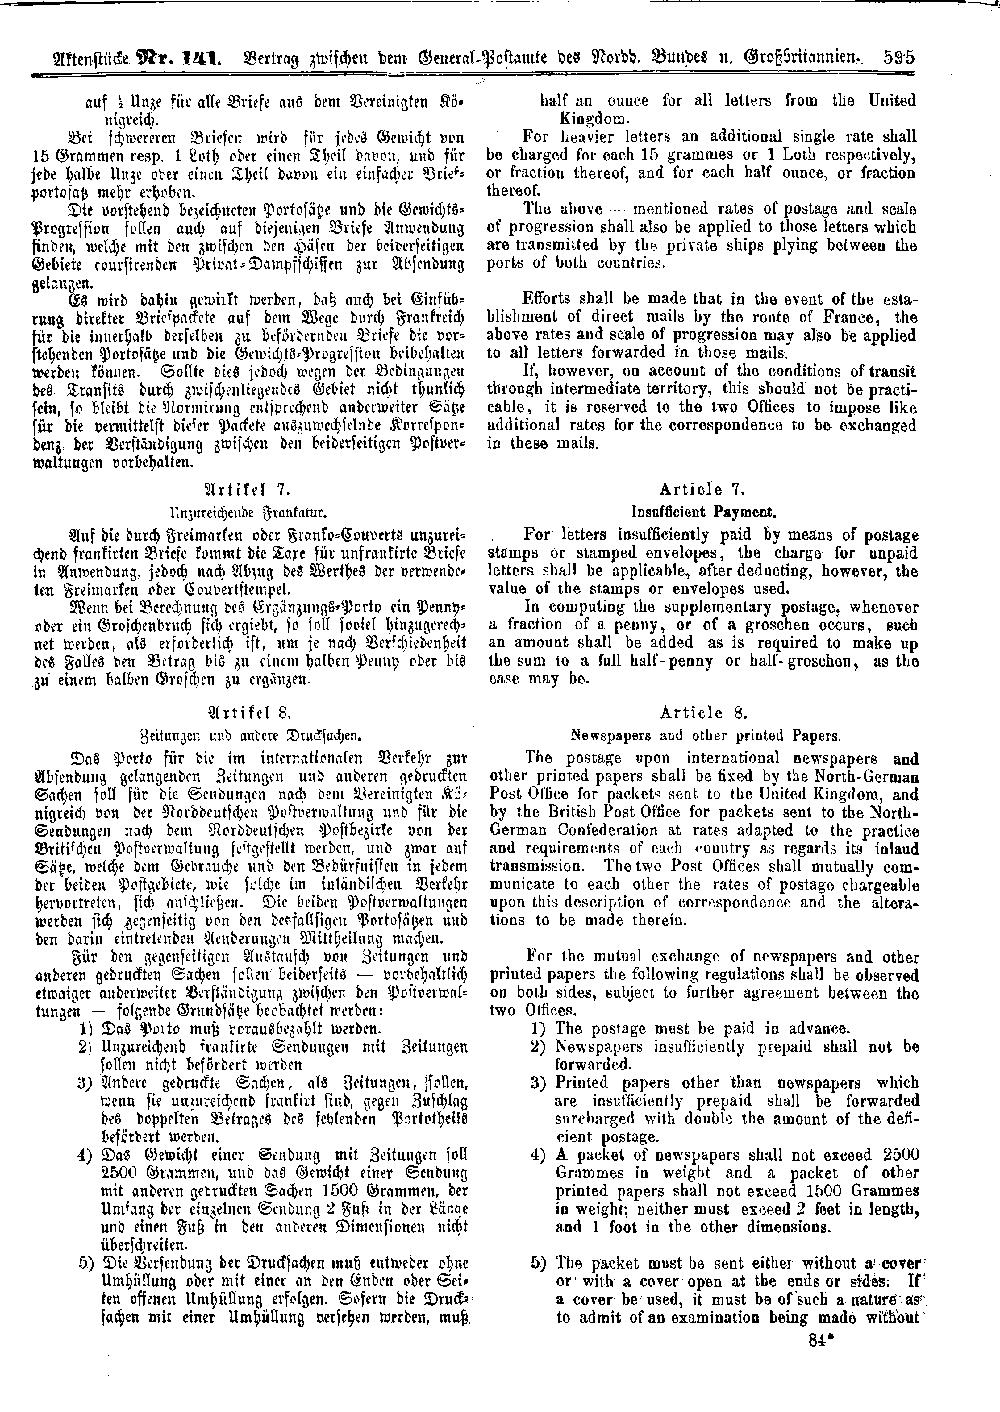 Scan of page 595